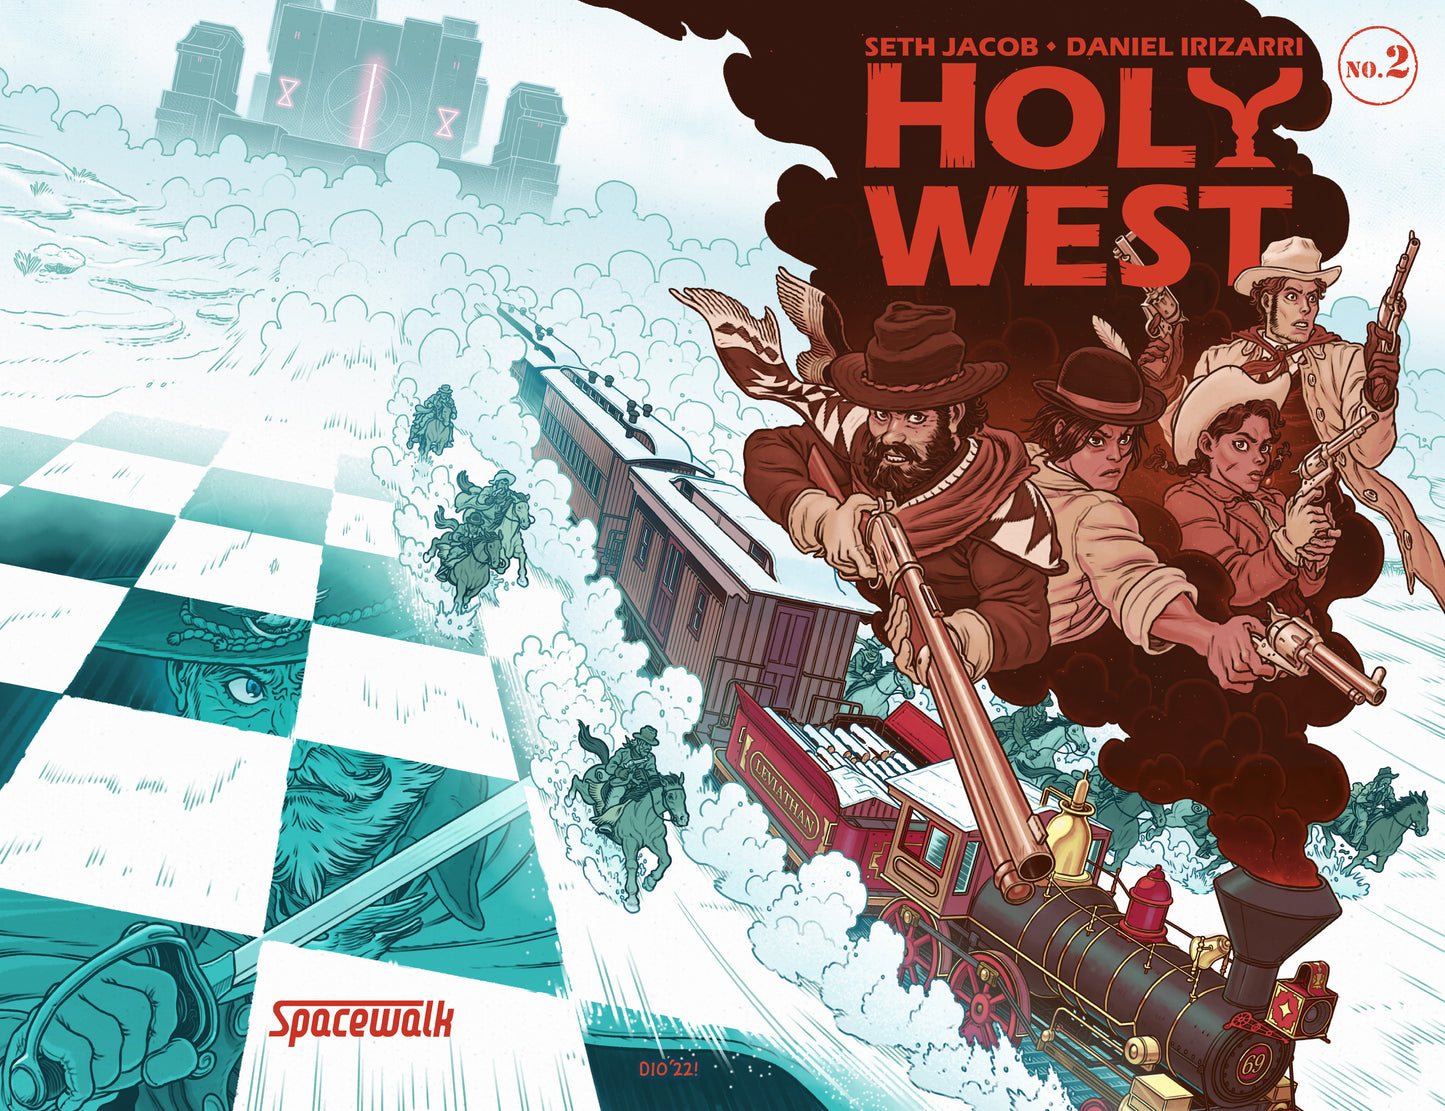 HOLY WEST #2